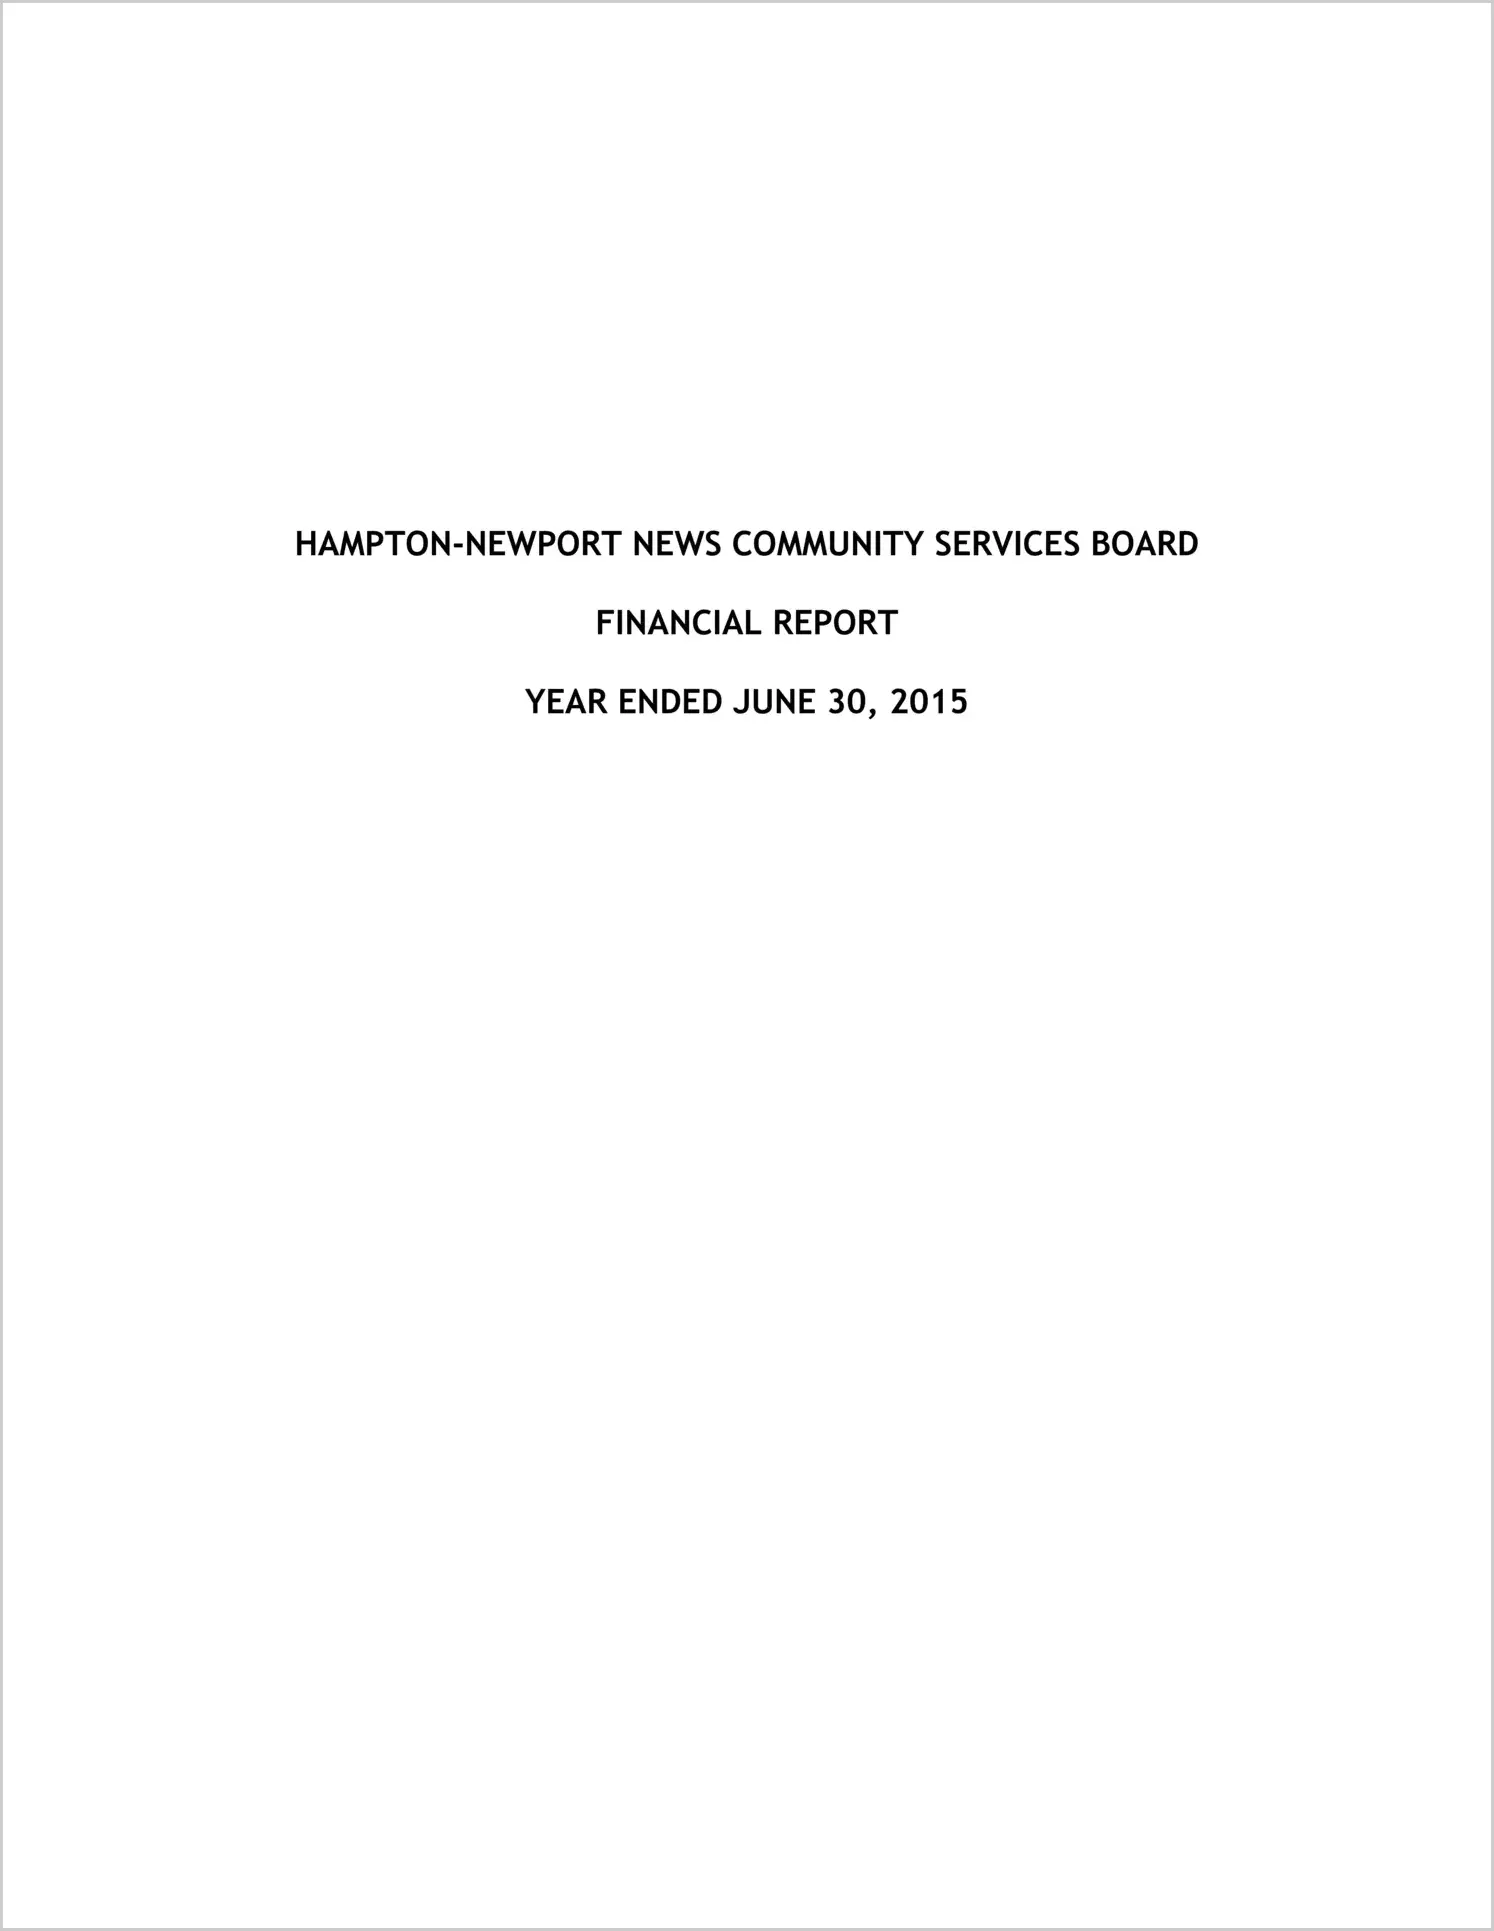 2015 ABC/Other Annual Financial Report  for Hampton-Newport News Community Services Board